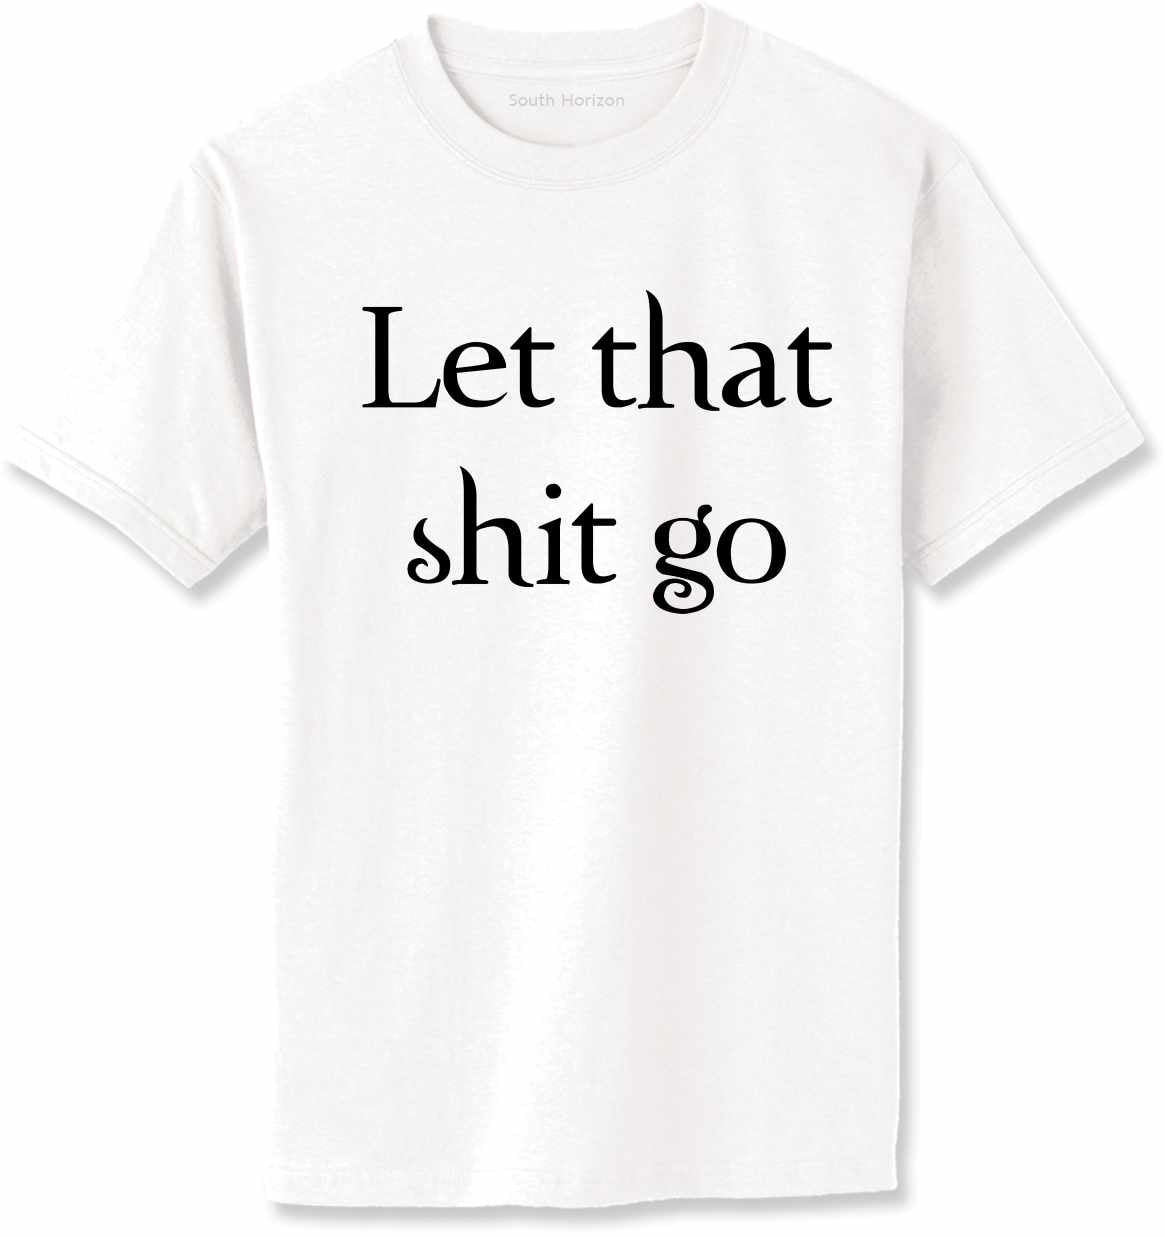 Let that shit go on Adult T-Shirt